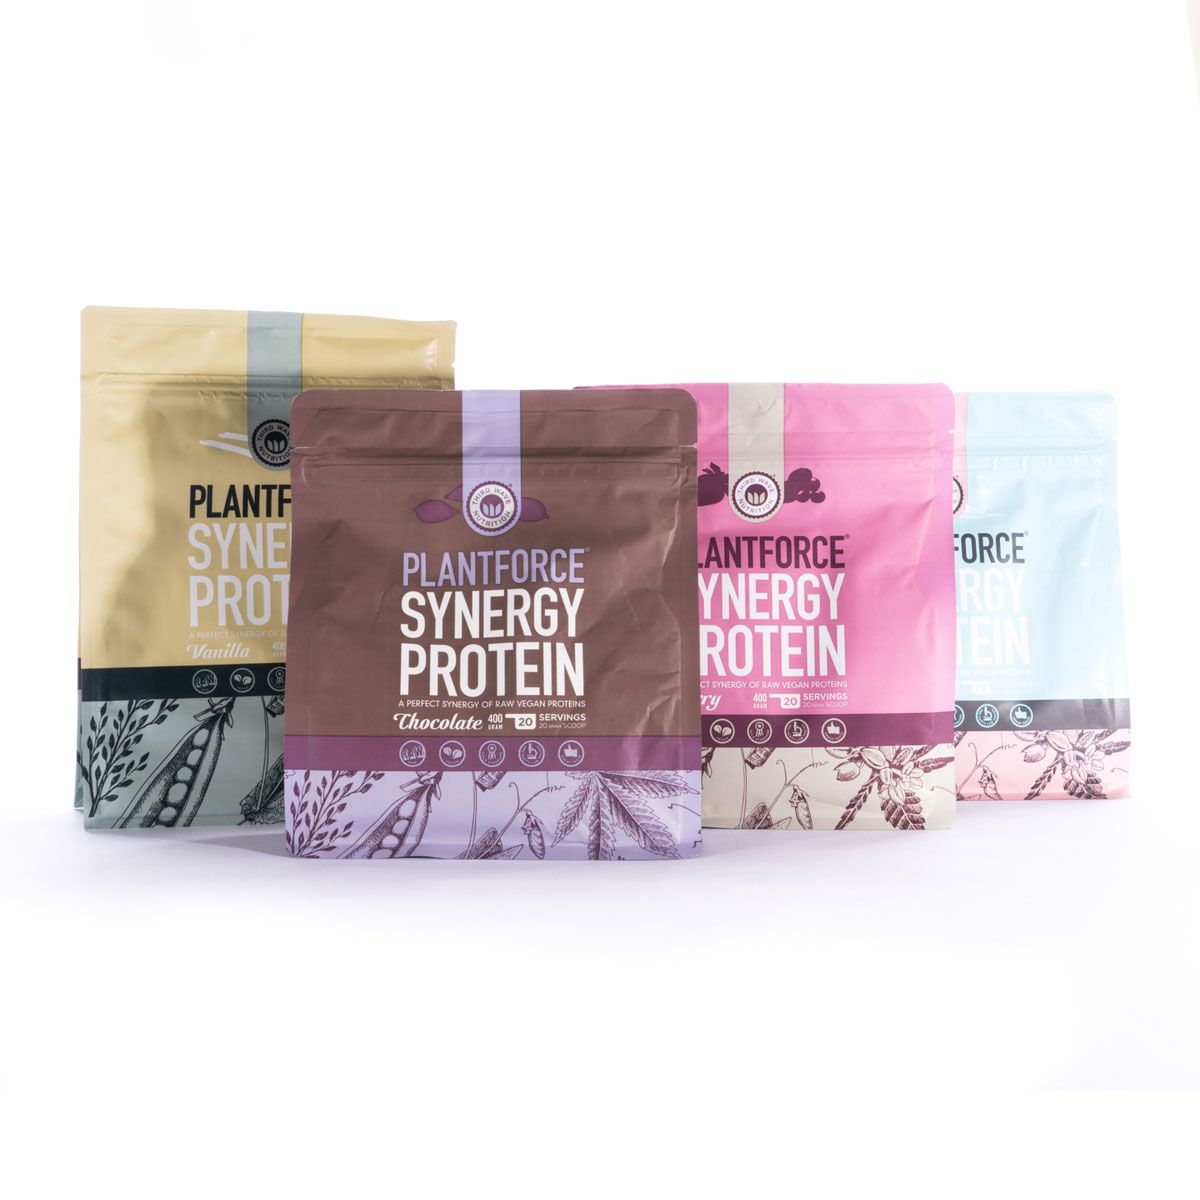 Plantforce Synergy Protein 800g - HealthyLiving.ie